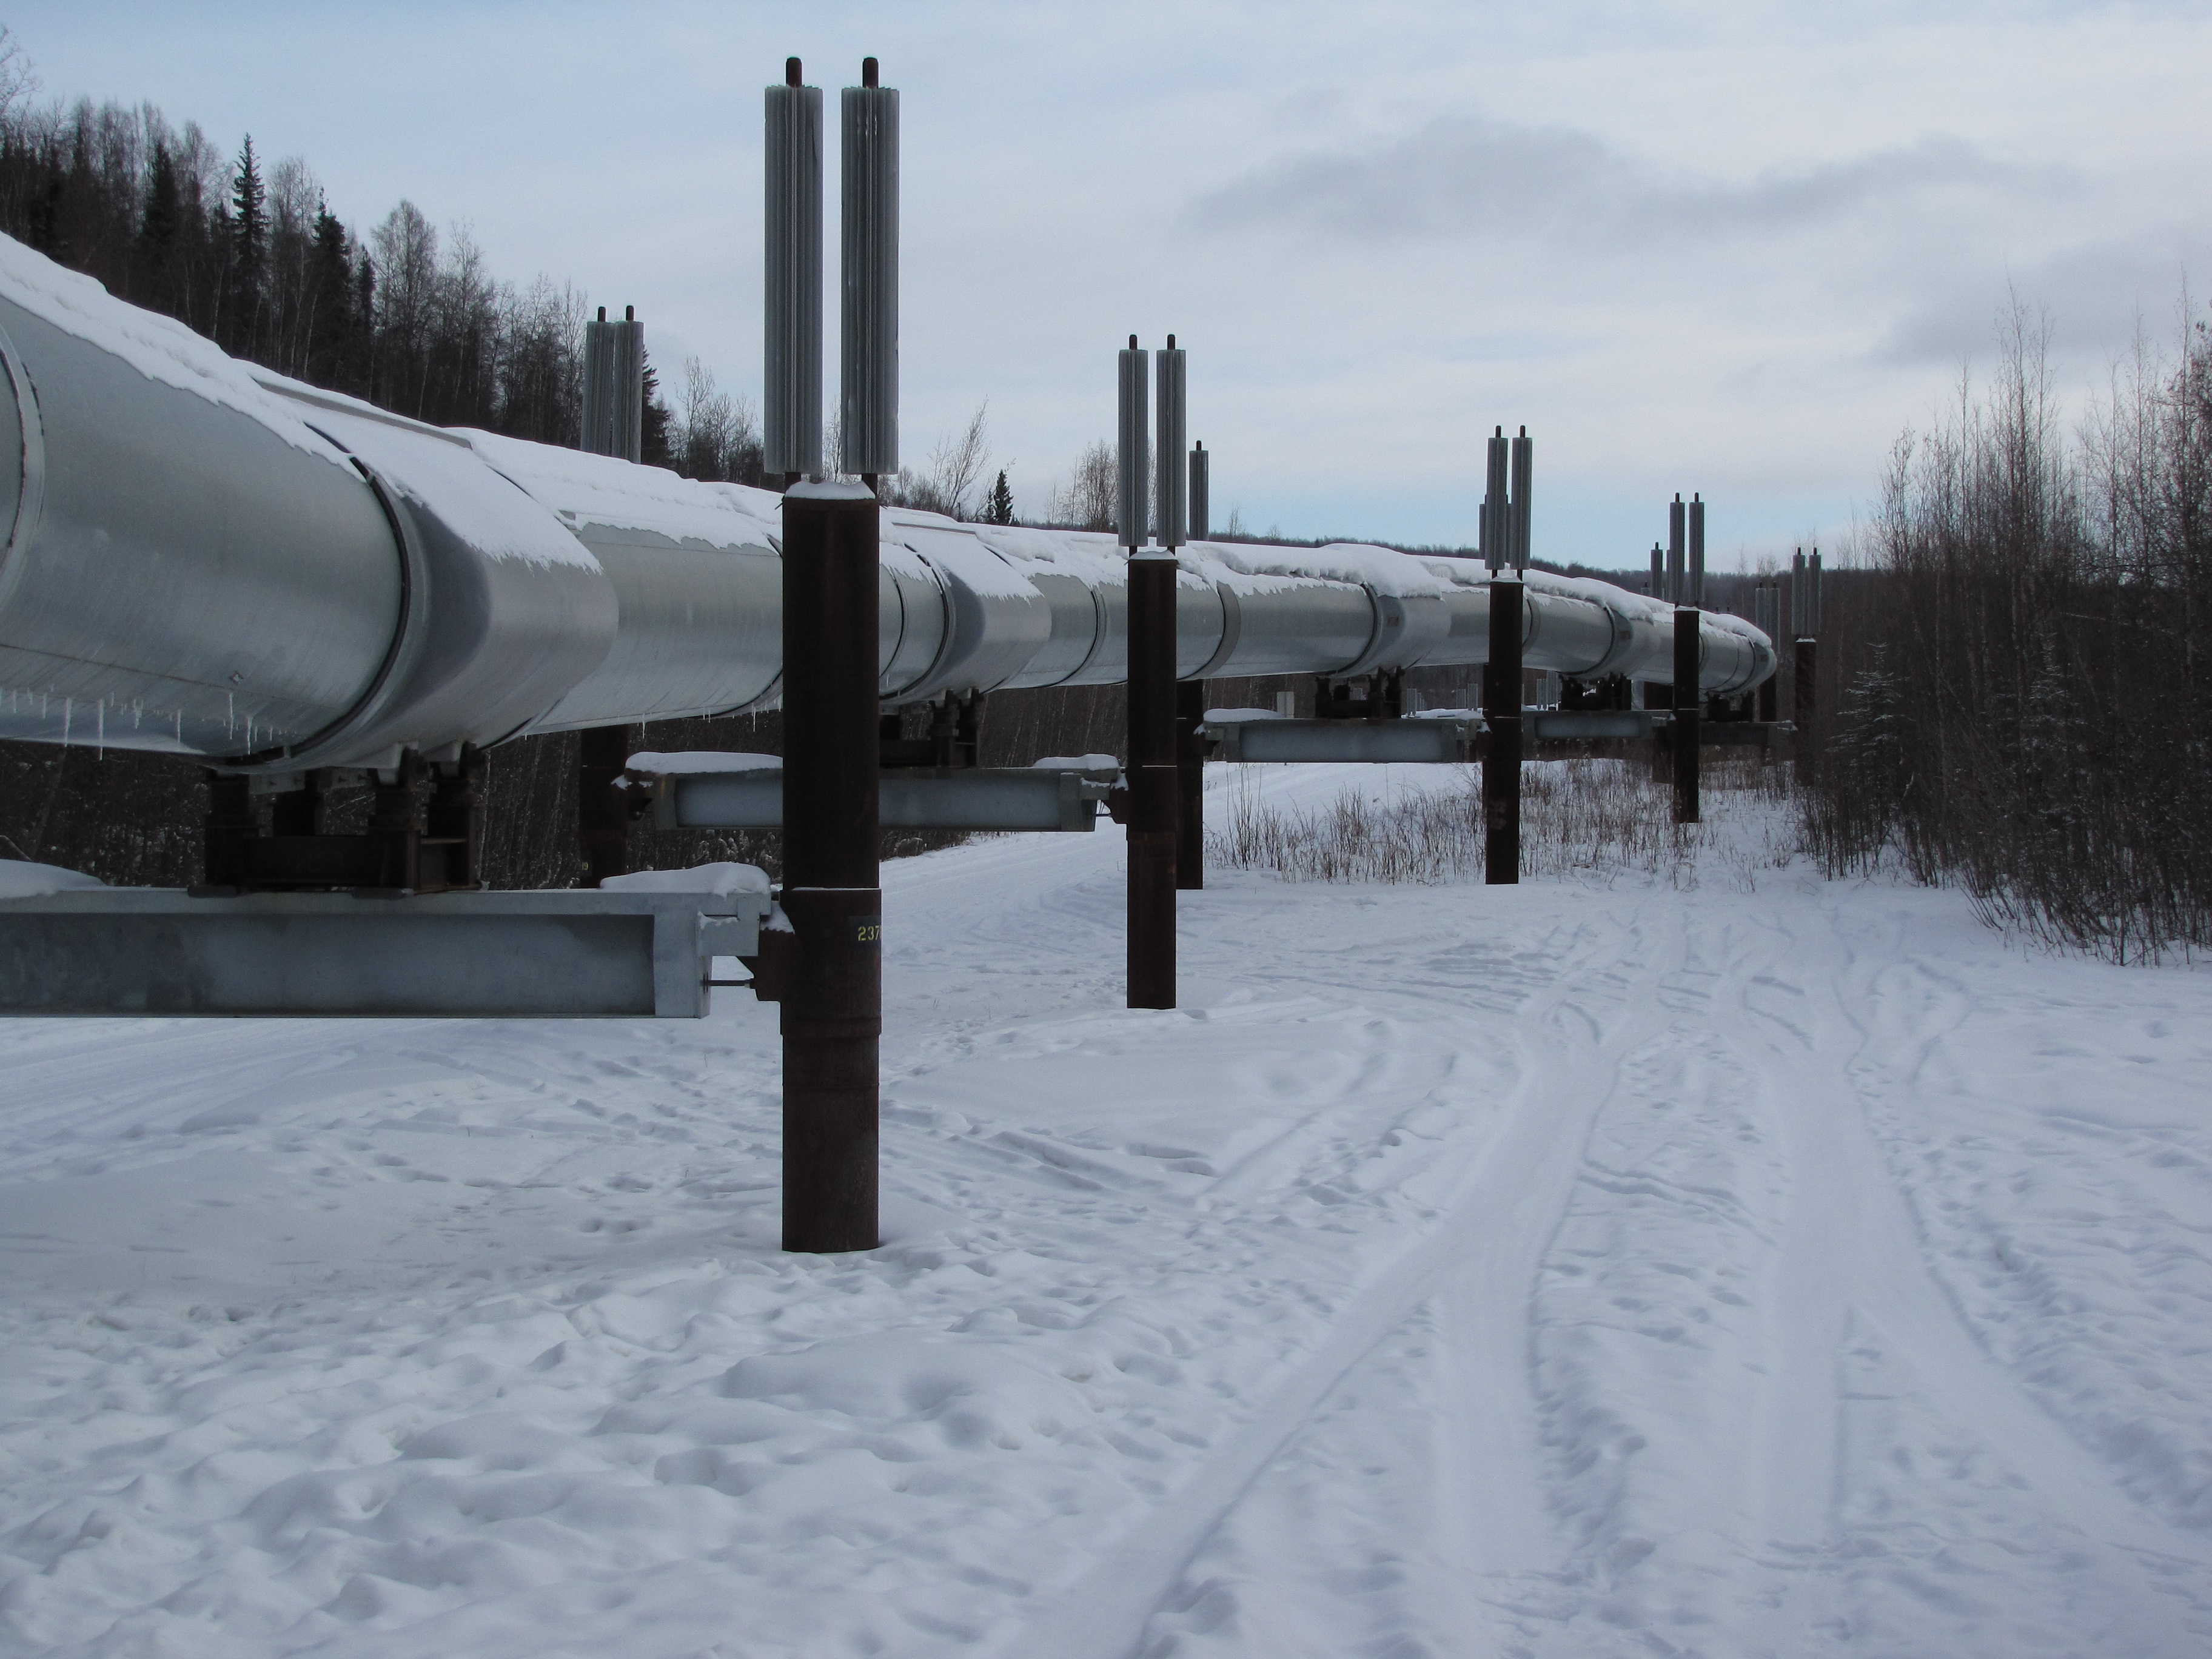 A large pipe cuts through snowy woods.